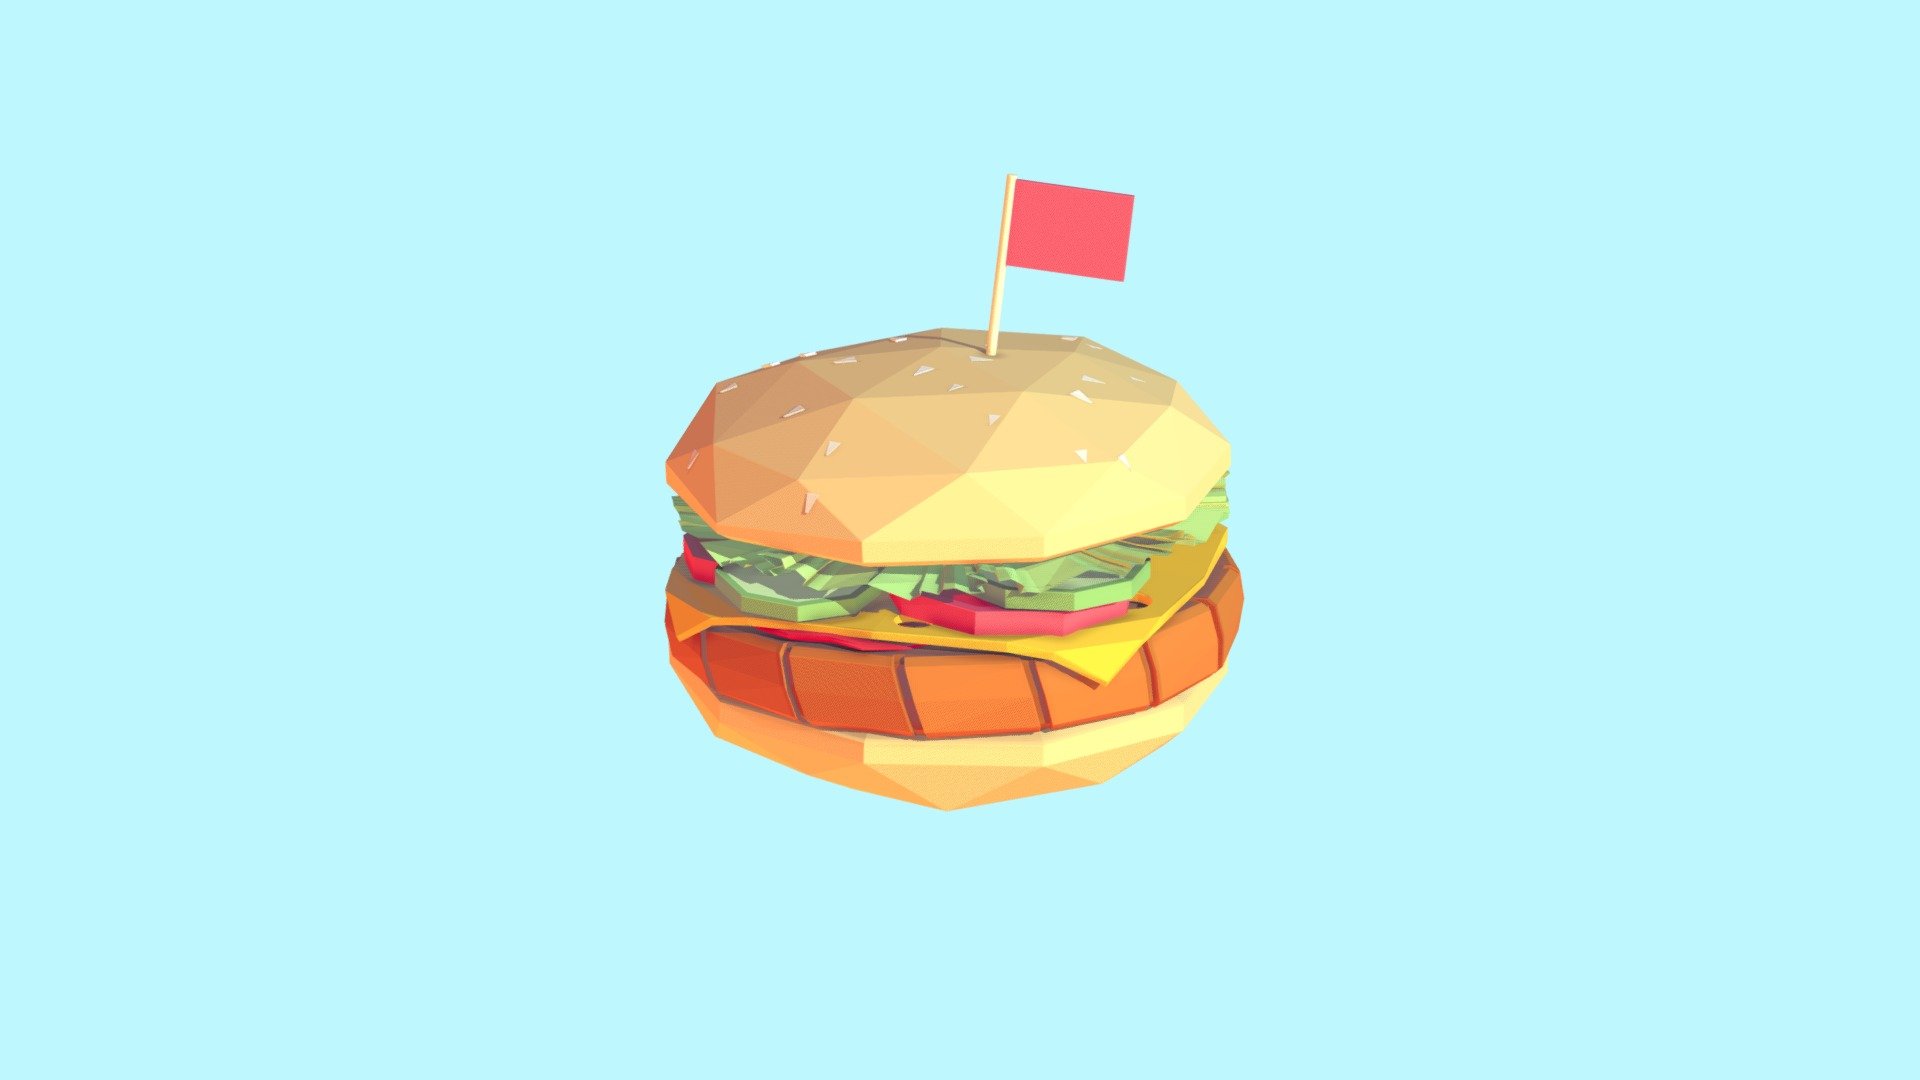 Hign Quality 3d Scene for Motion Design, Game Development, Digital  Illustration .Works on Browser, Realtime Render Engines.

Cartoon Low Poly Paper style Burger

Created on Cinema 4d R17 

1326 Polygons

Procedural Textured 

Game Ready, AR/ VR Ready
 - Cartoon Low Poly Paper Burger - Buy Royalty Free 3D model by antonmoek 3d model